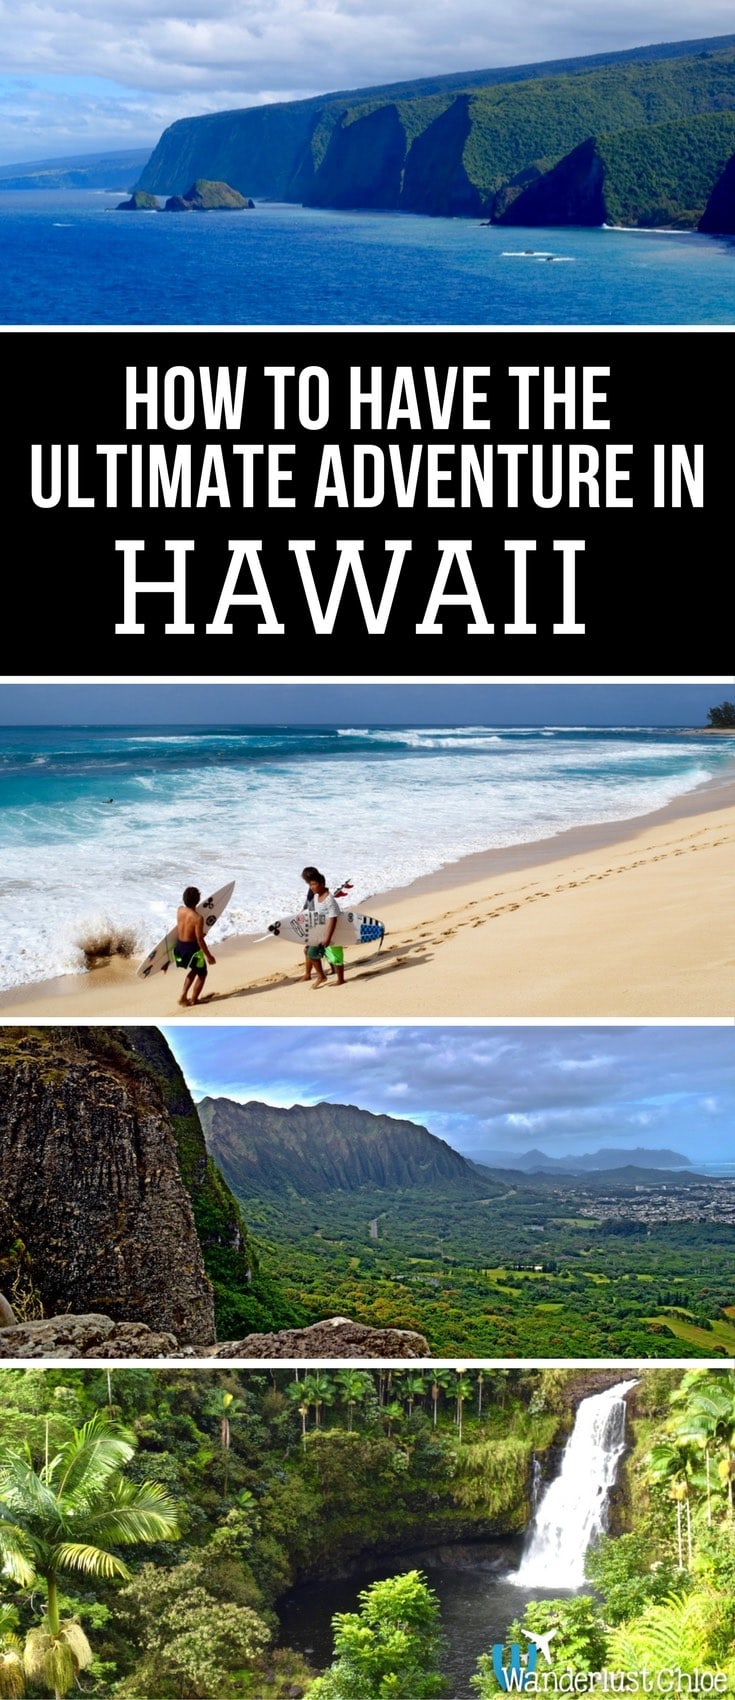 How To Have The Ultimate Adventure In Hawaii